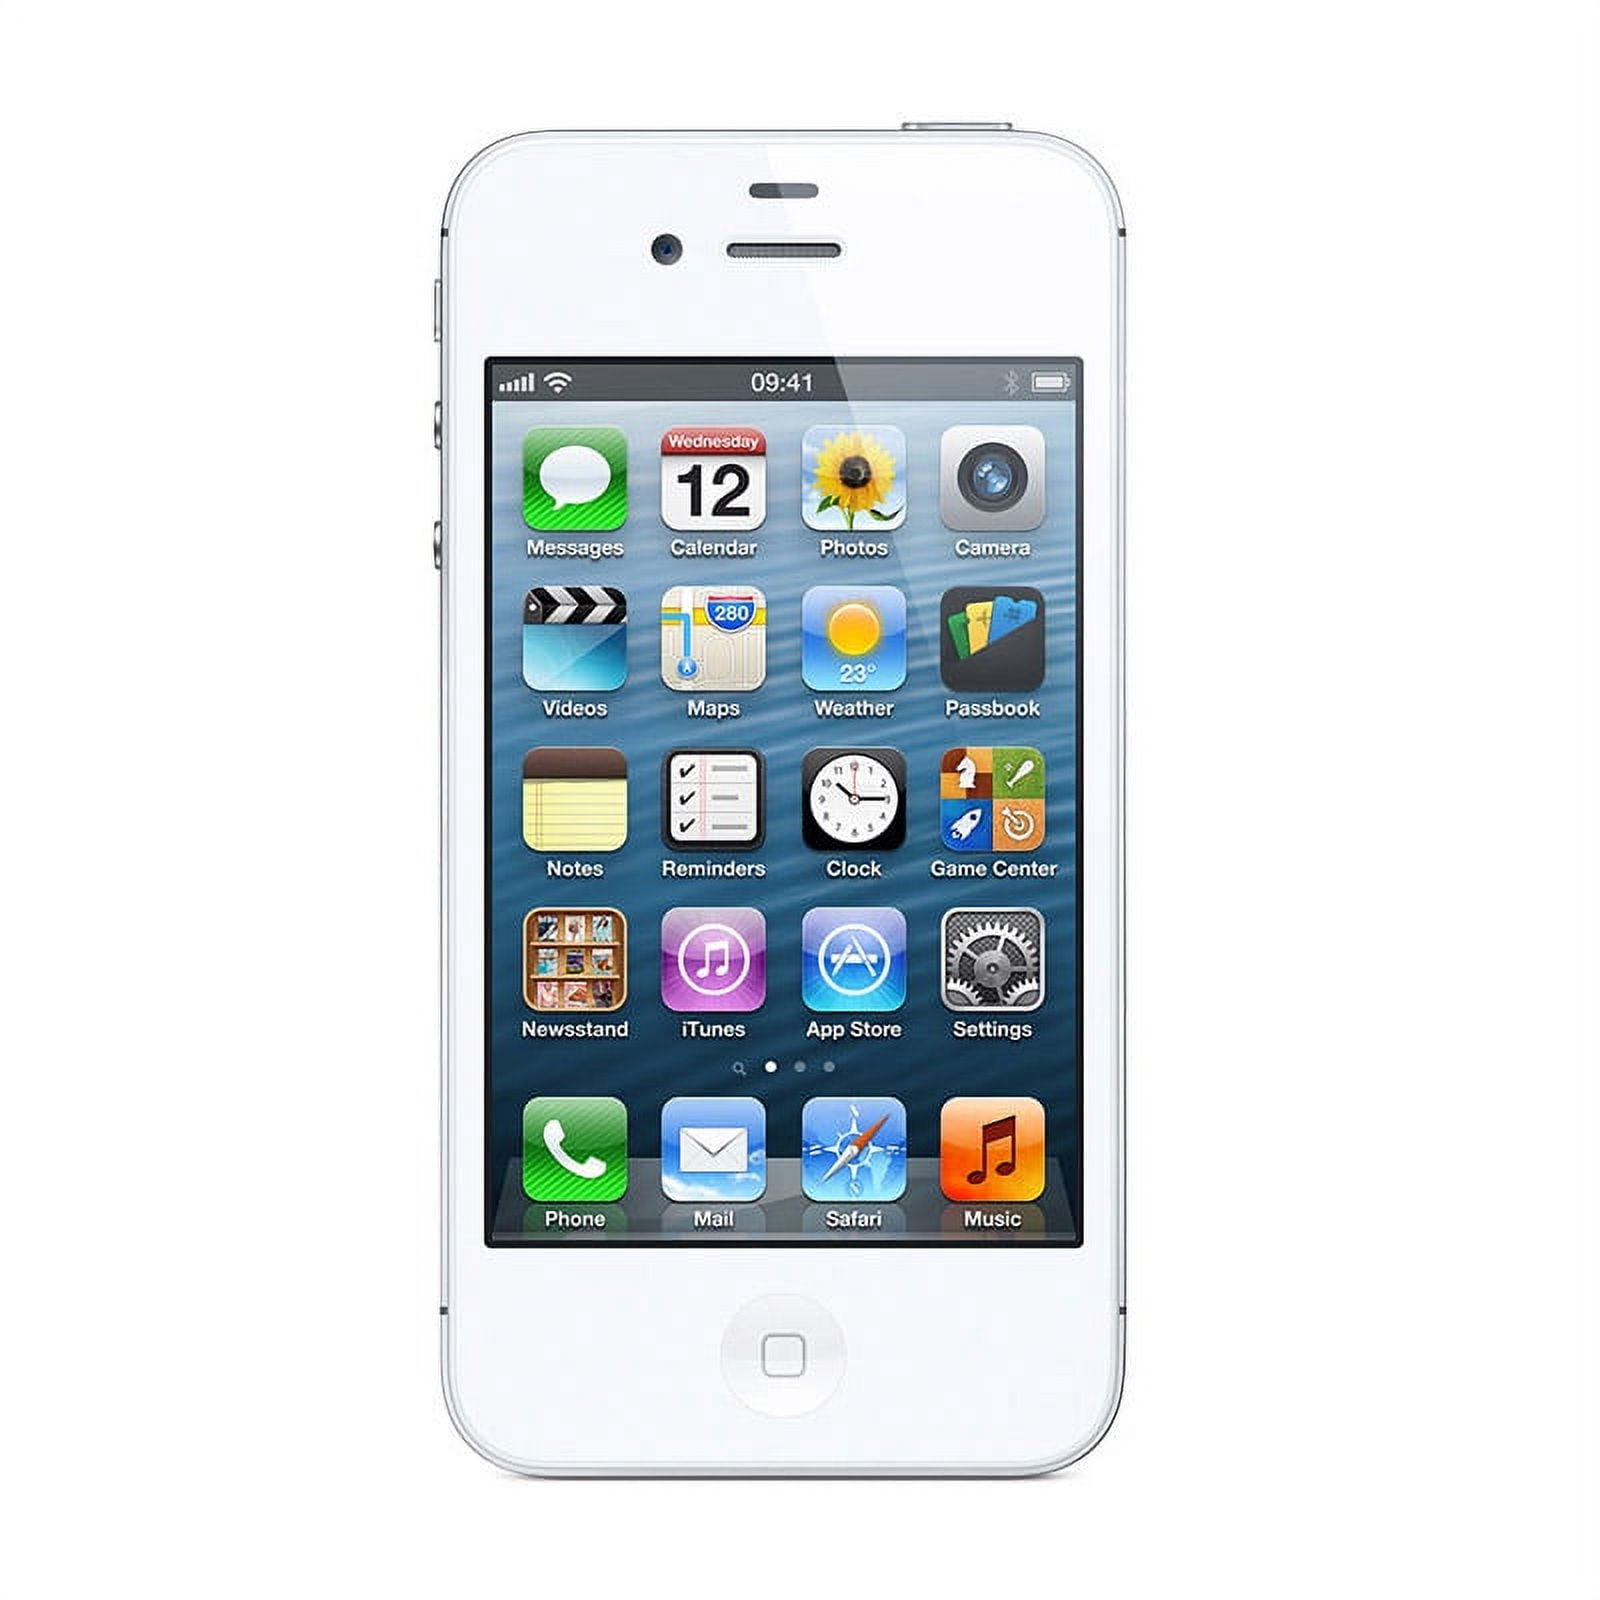 The iPhone 4S: Faster, More Capable, And You Can Talk To It